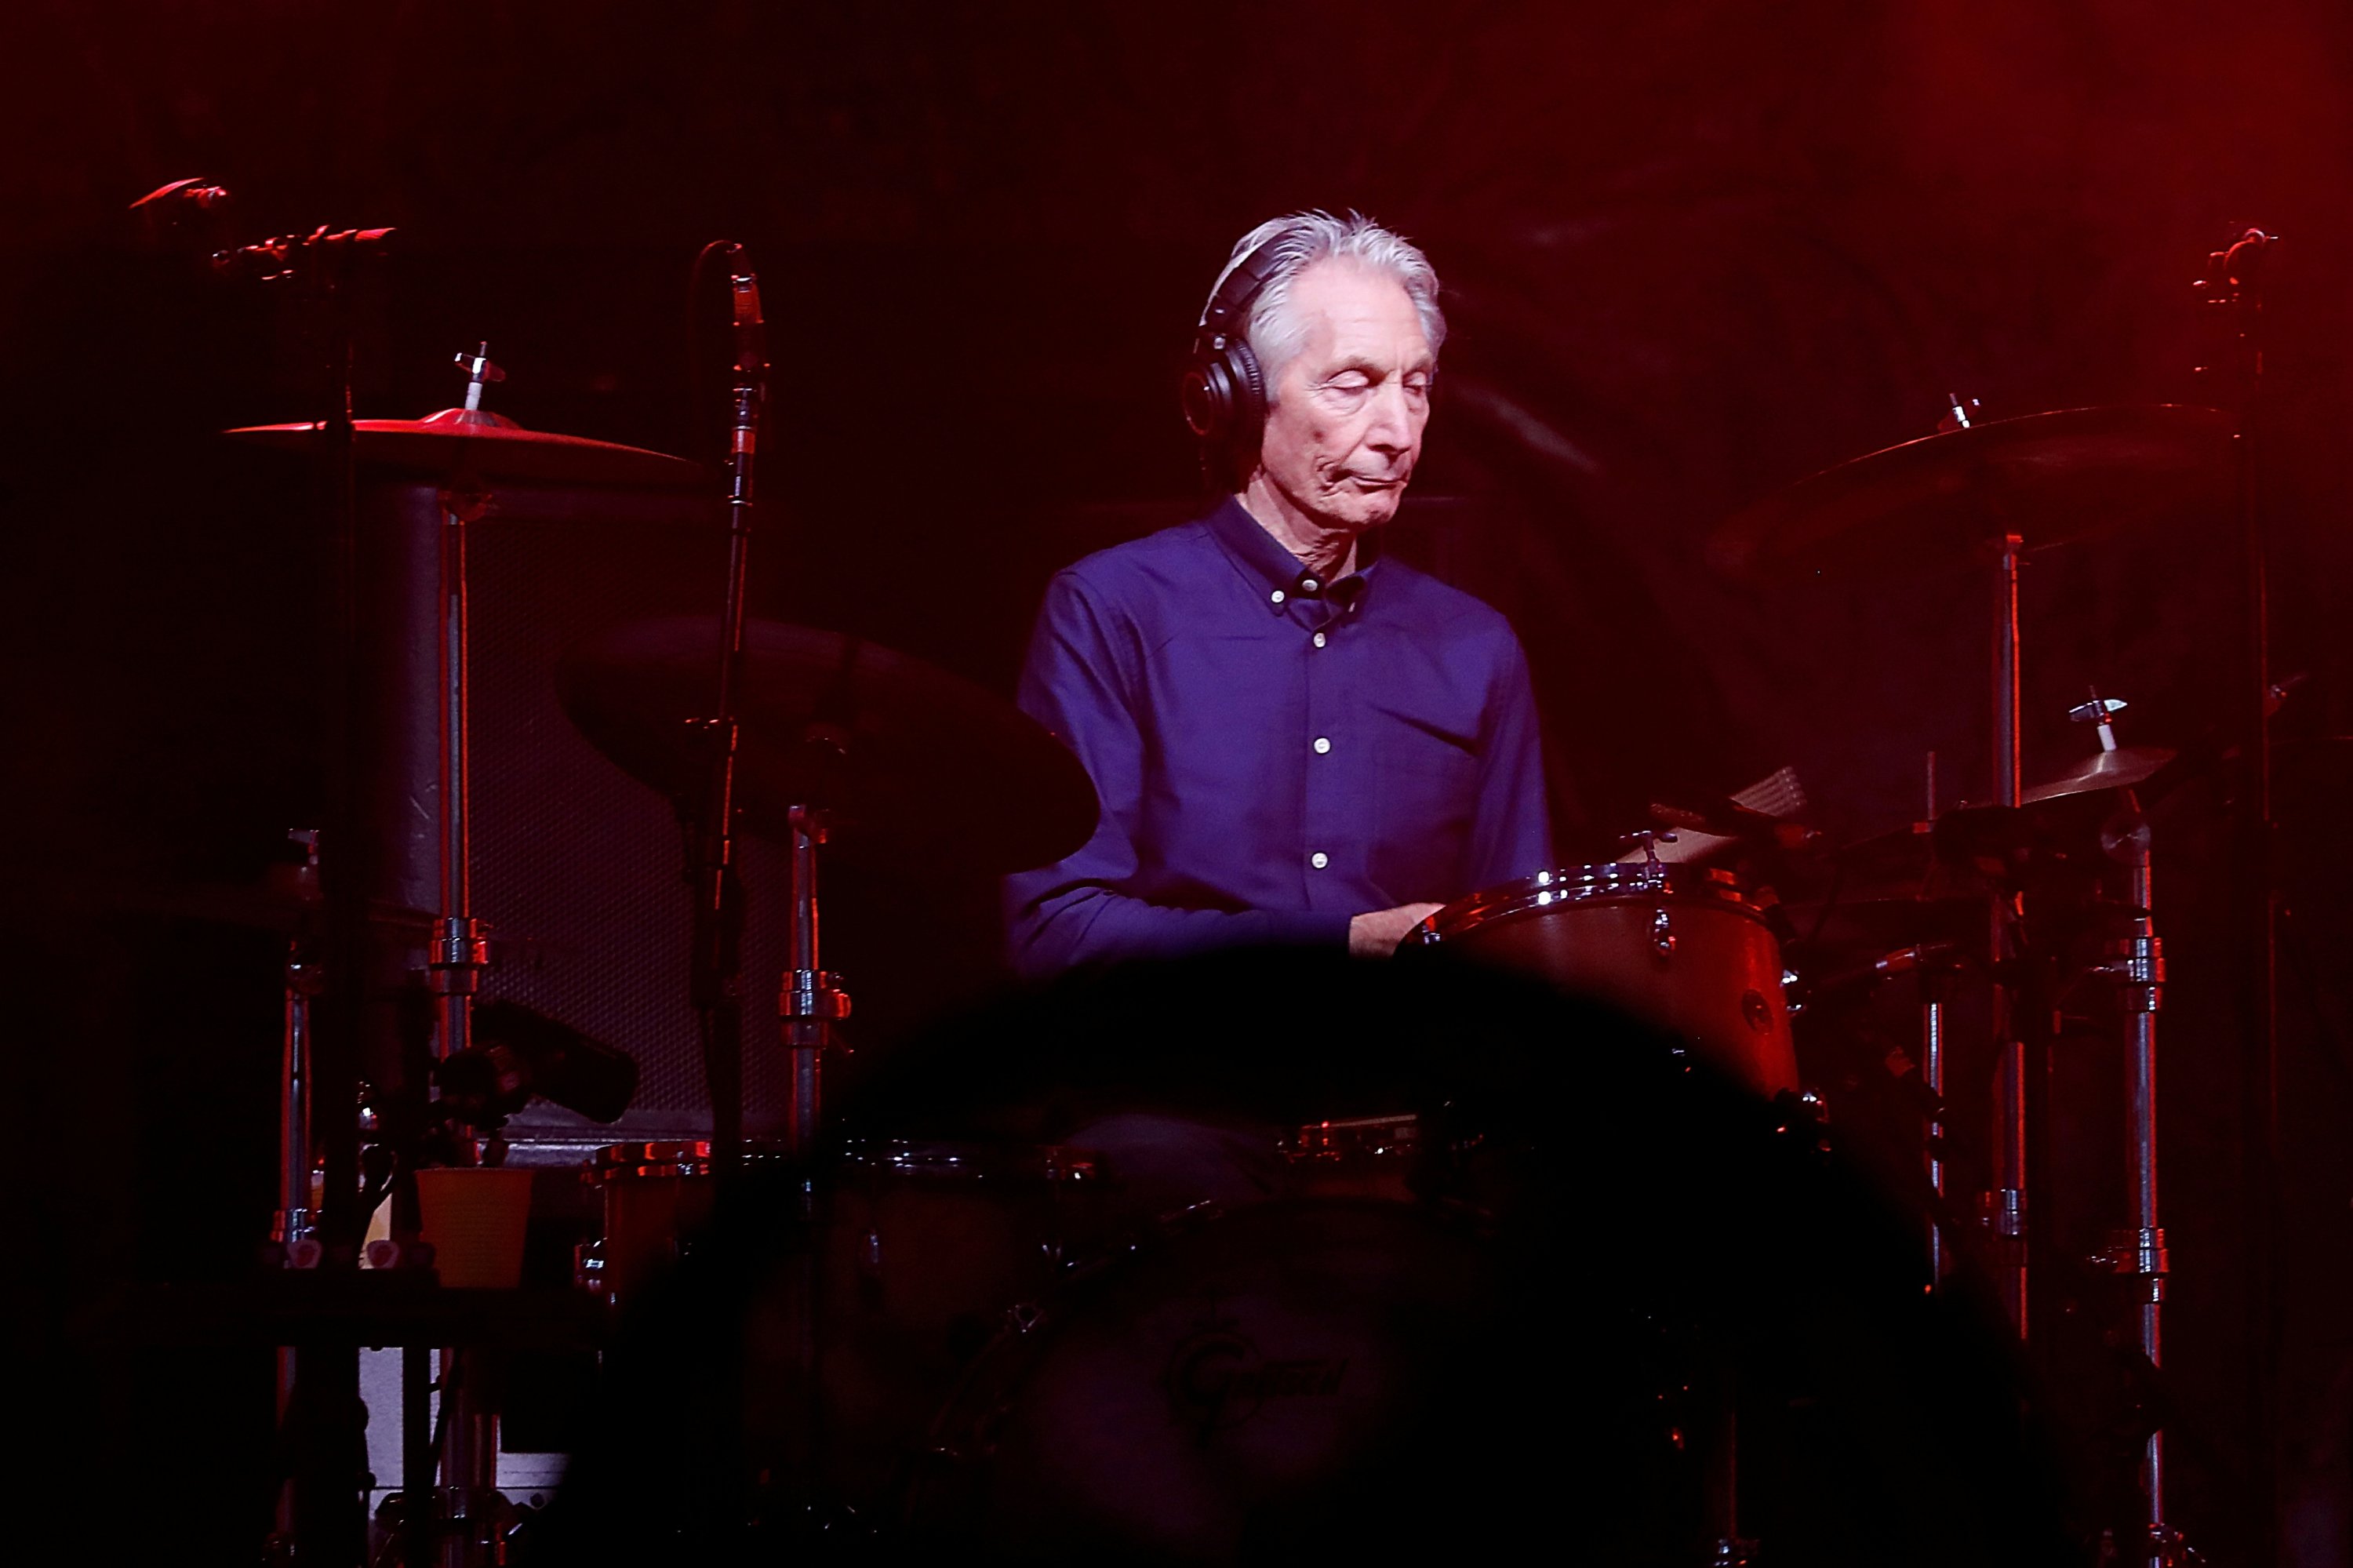 Charlie Watts of the Rolling Stones performs during a concert of their 'No Filter' European tour at the new U Arena stadium in Nanterre near Paris, France, Oct. 19, 2017. (REUTERS Photo)